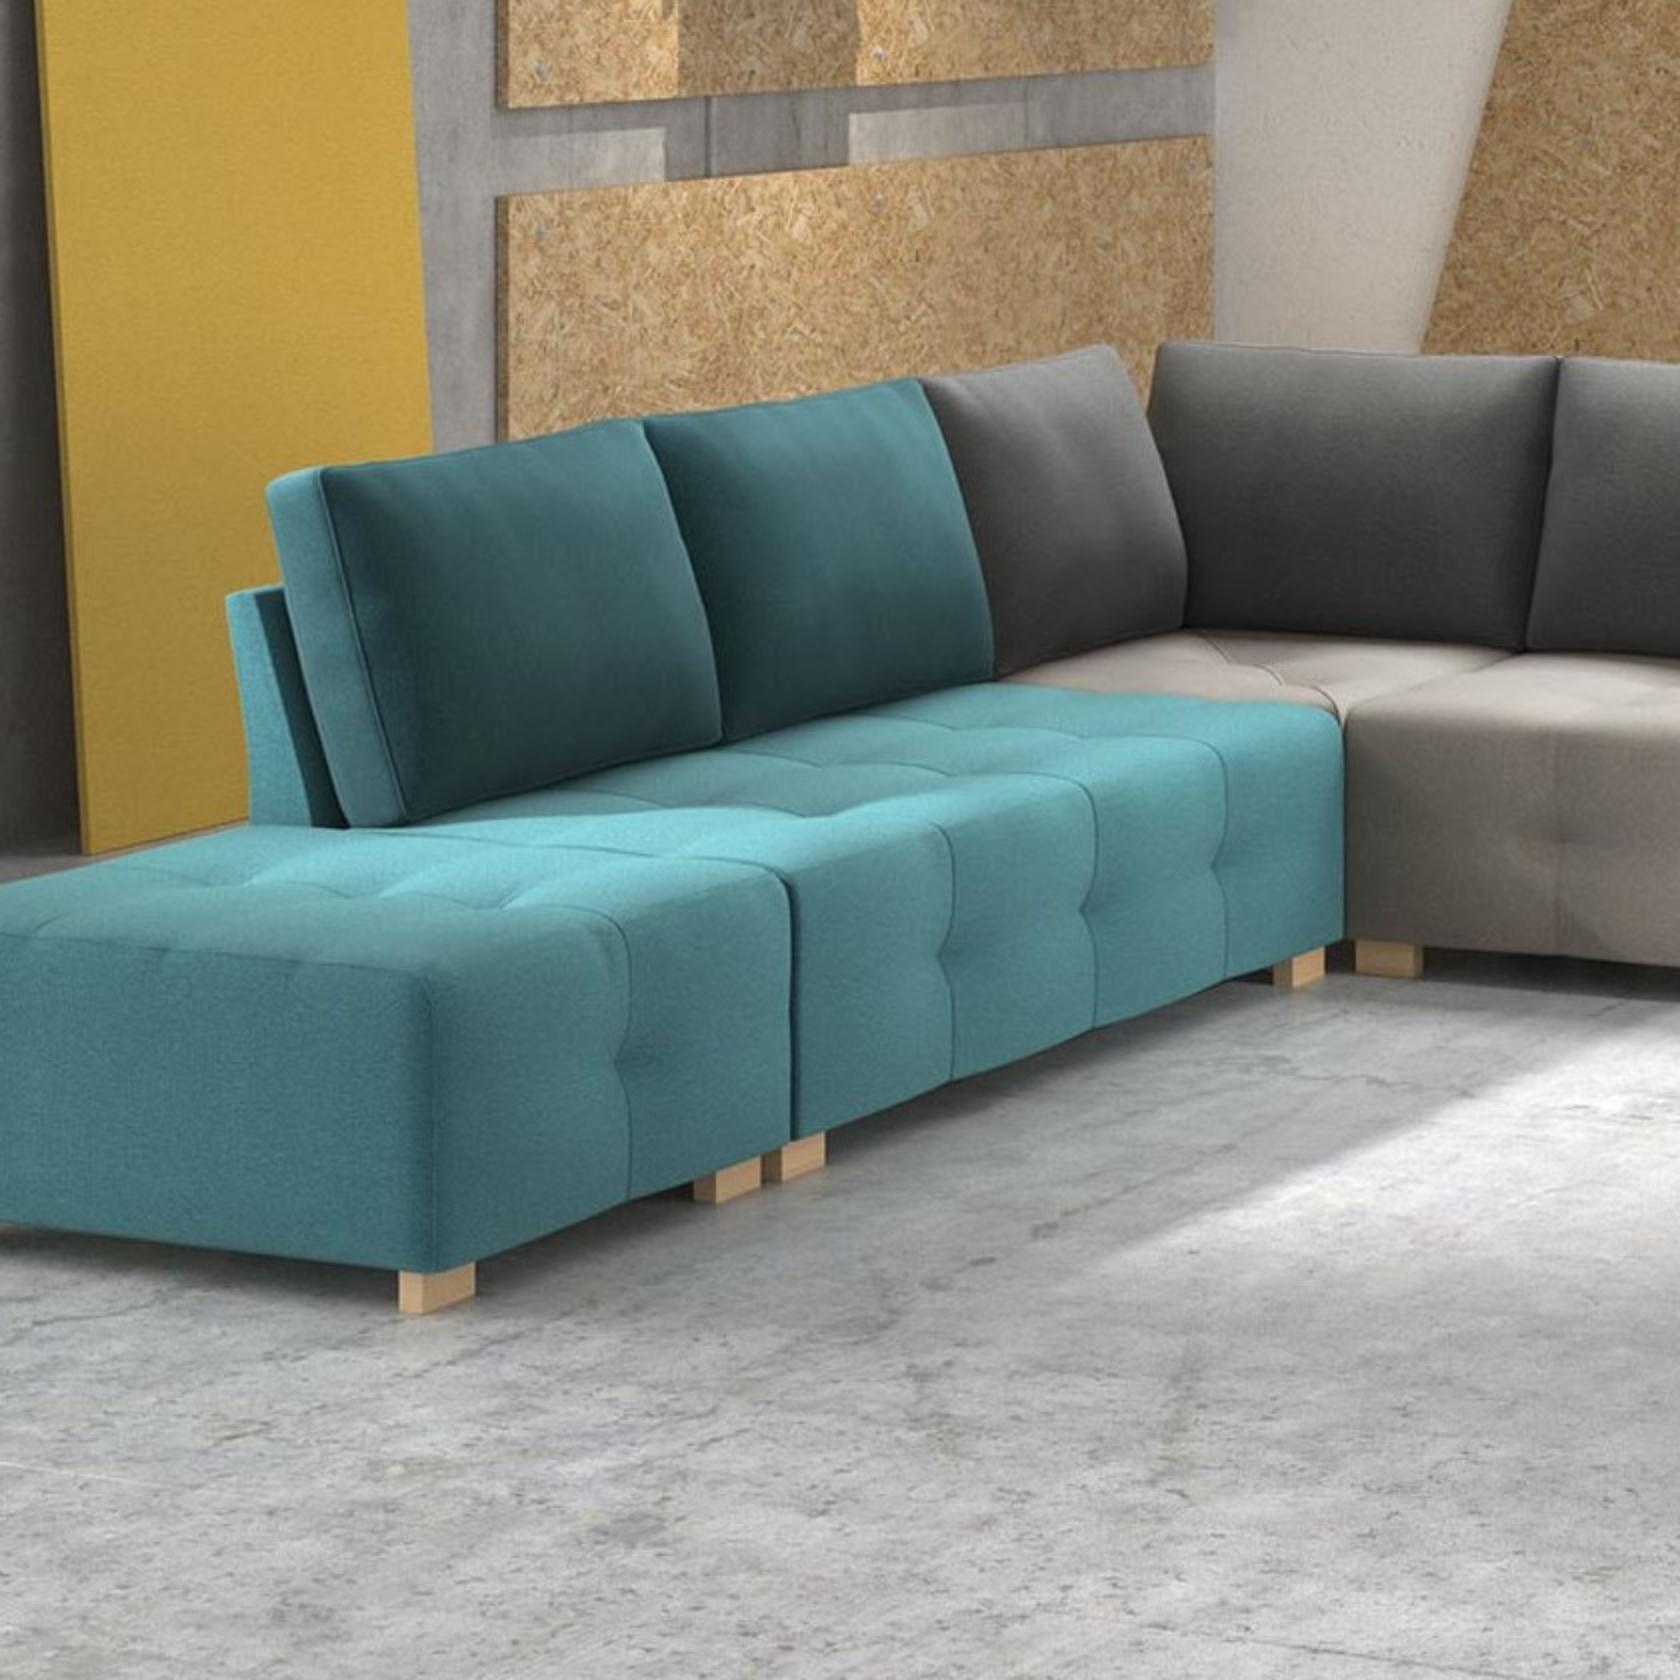 Point sofa by Pepe Albargues
Dimensions: W 200 x D 90 x H 88 cm
Materials: Pine wood structure reinforced with plywood and tablex.
Seat CMHR (high resilence and flame retardant) for all our cushion filling systems.
Back cushion stuffed with 50%